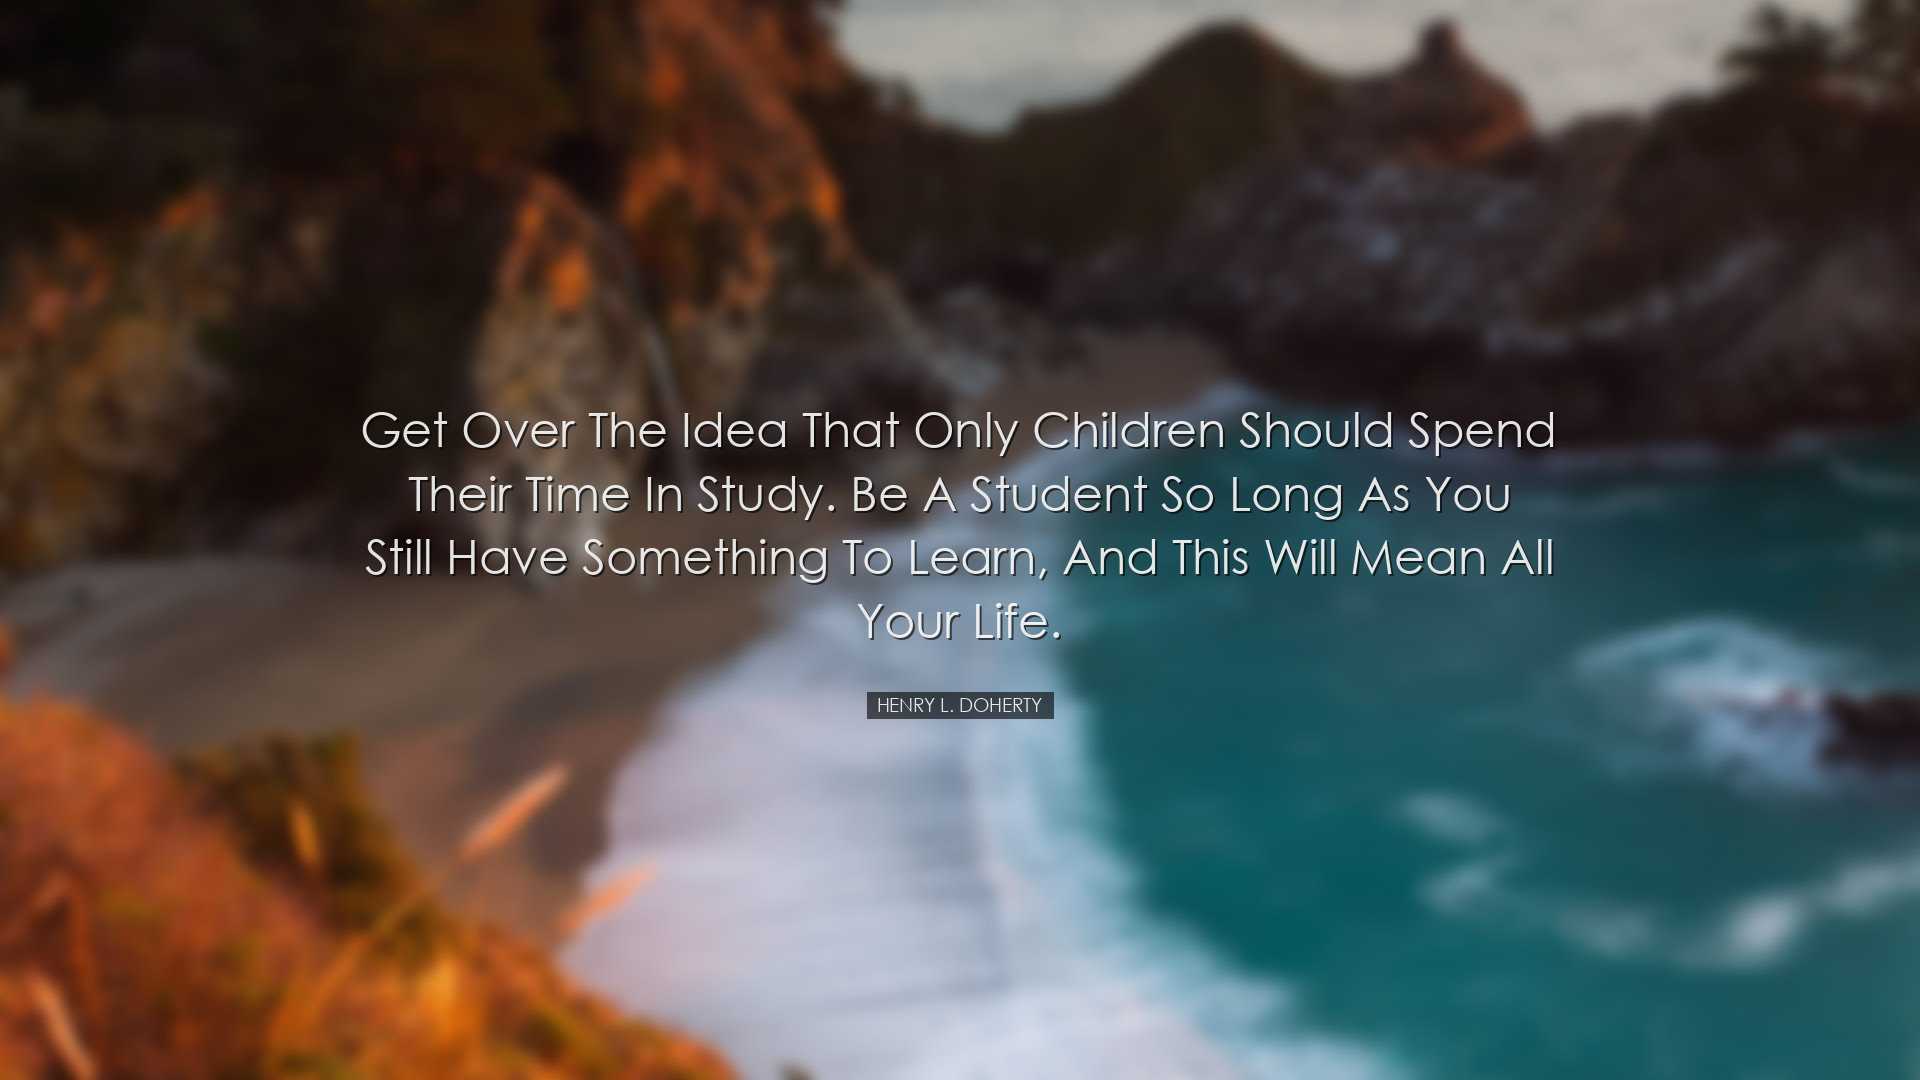 Get over the idea that only children should spend their time in st